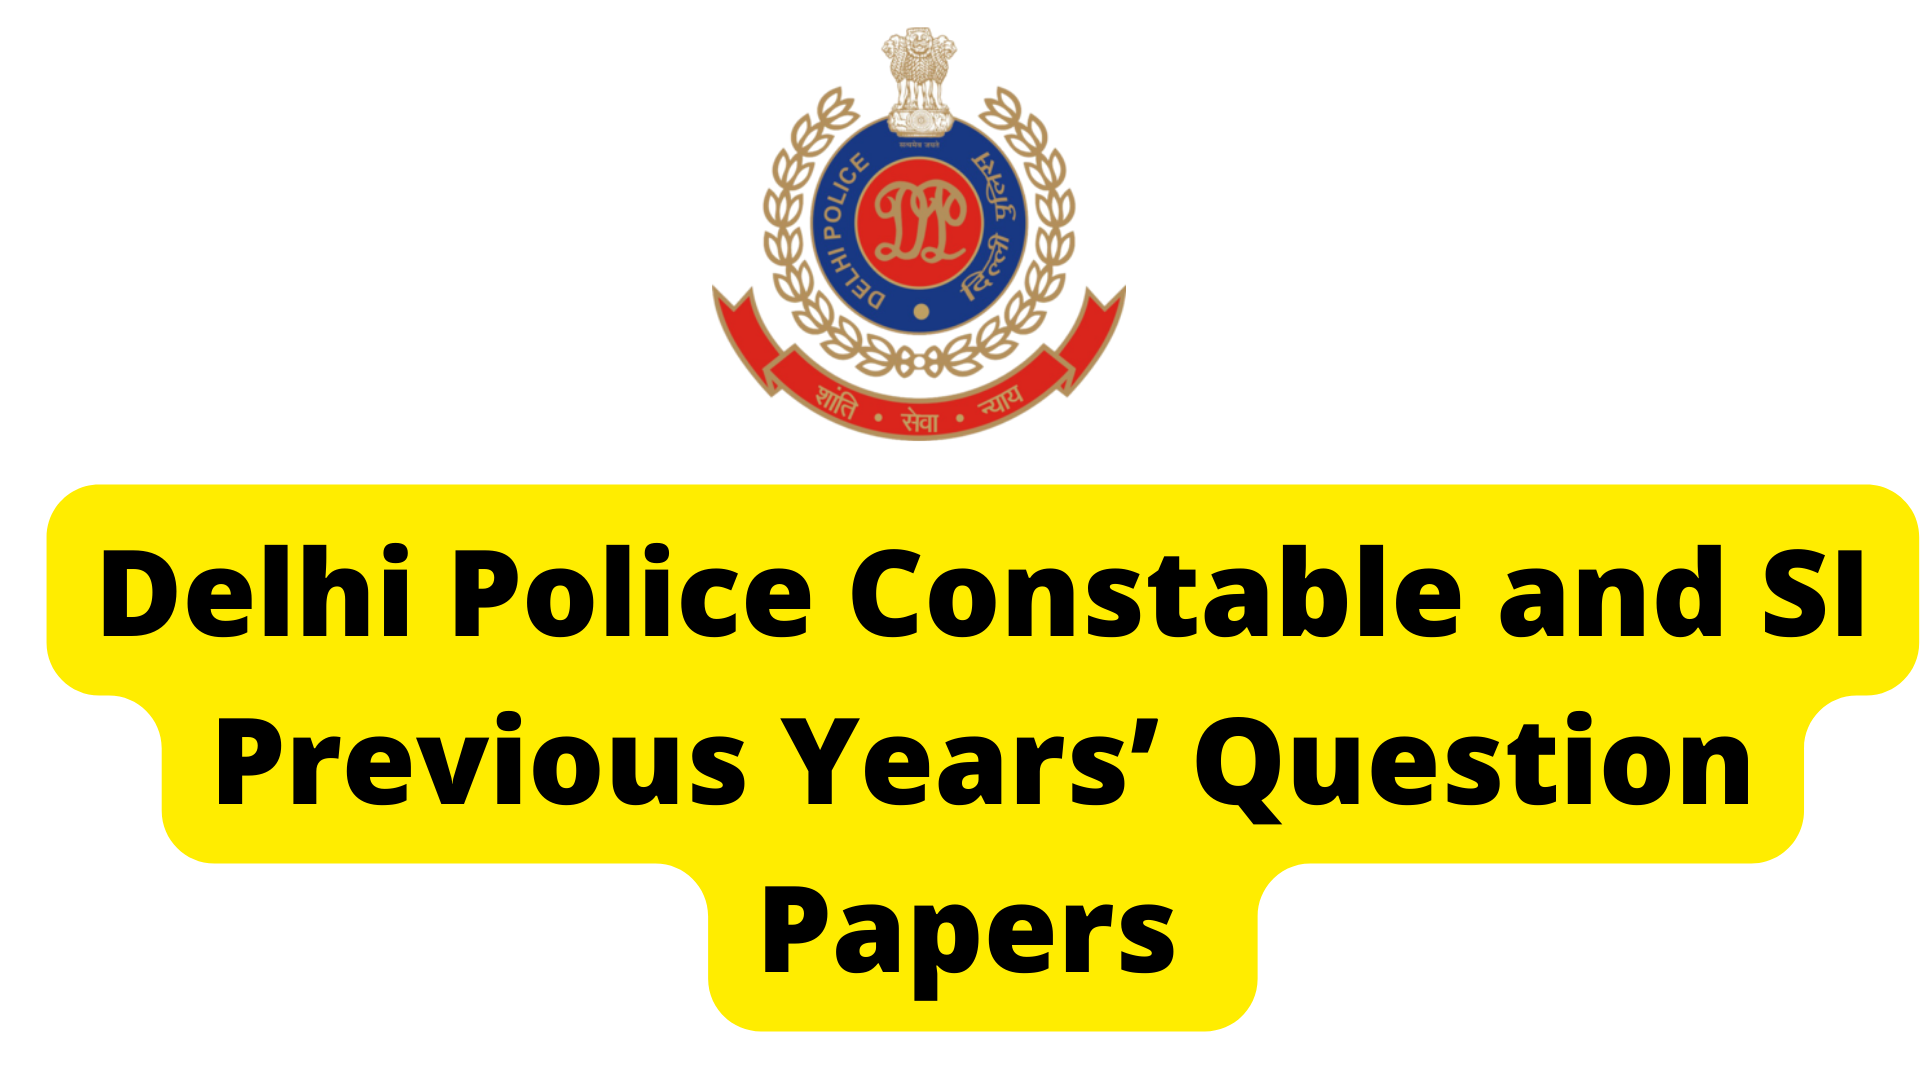 Delhi Police Constable and SI Previous Years’ Question Papers